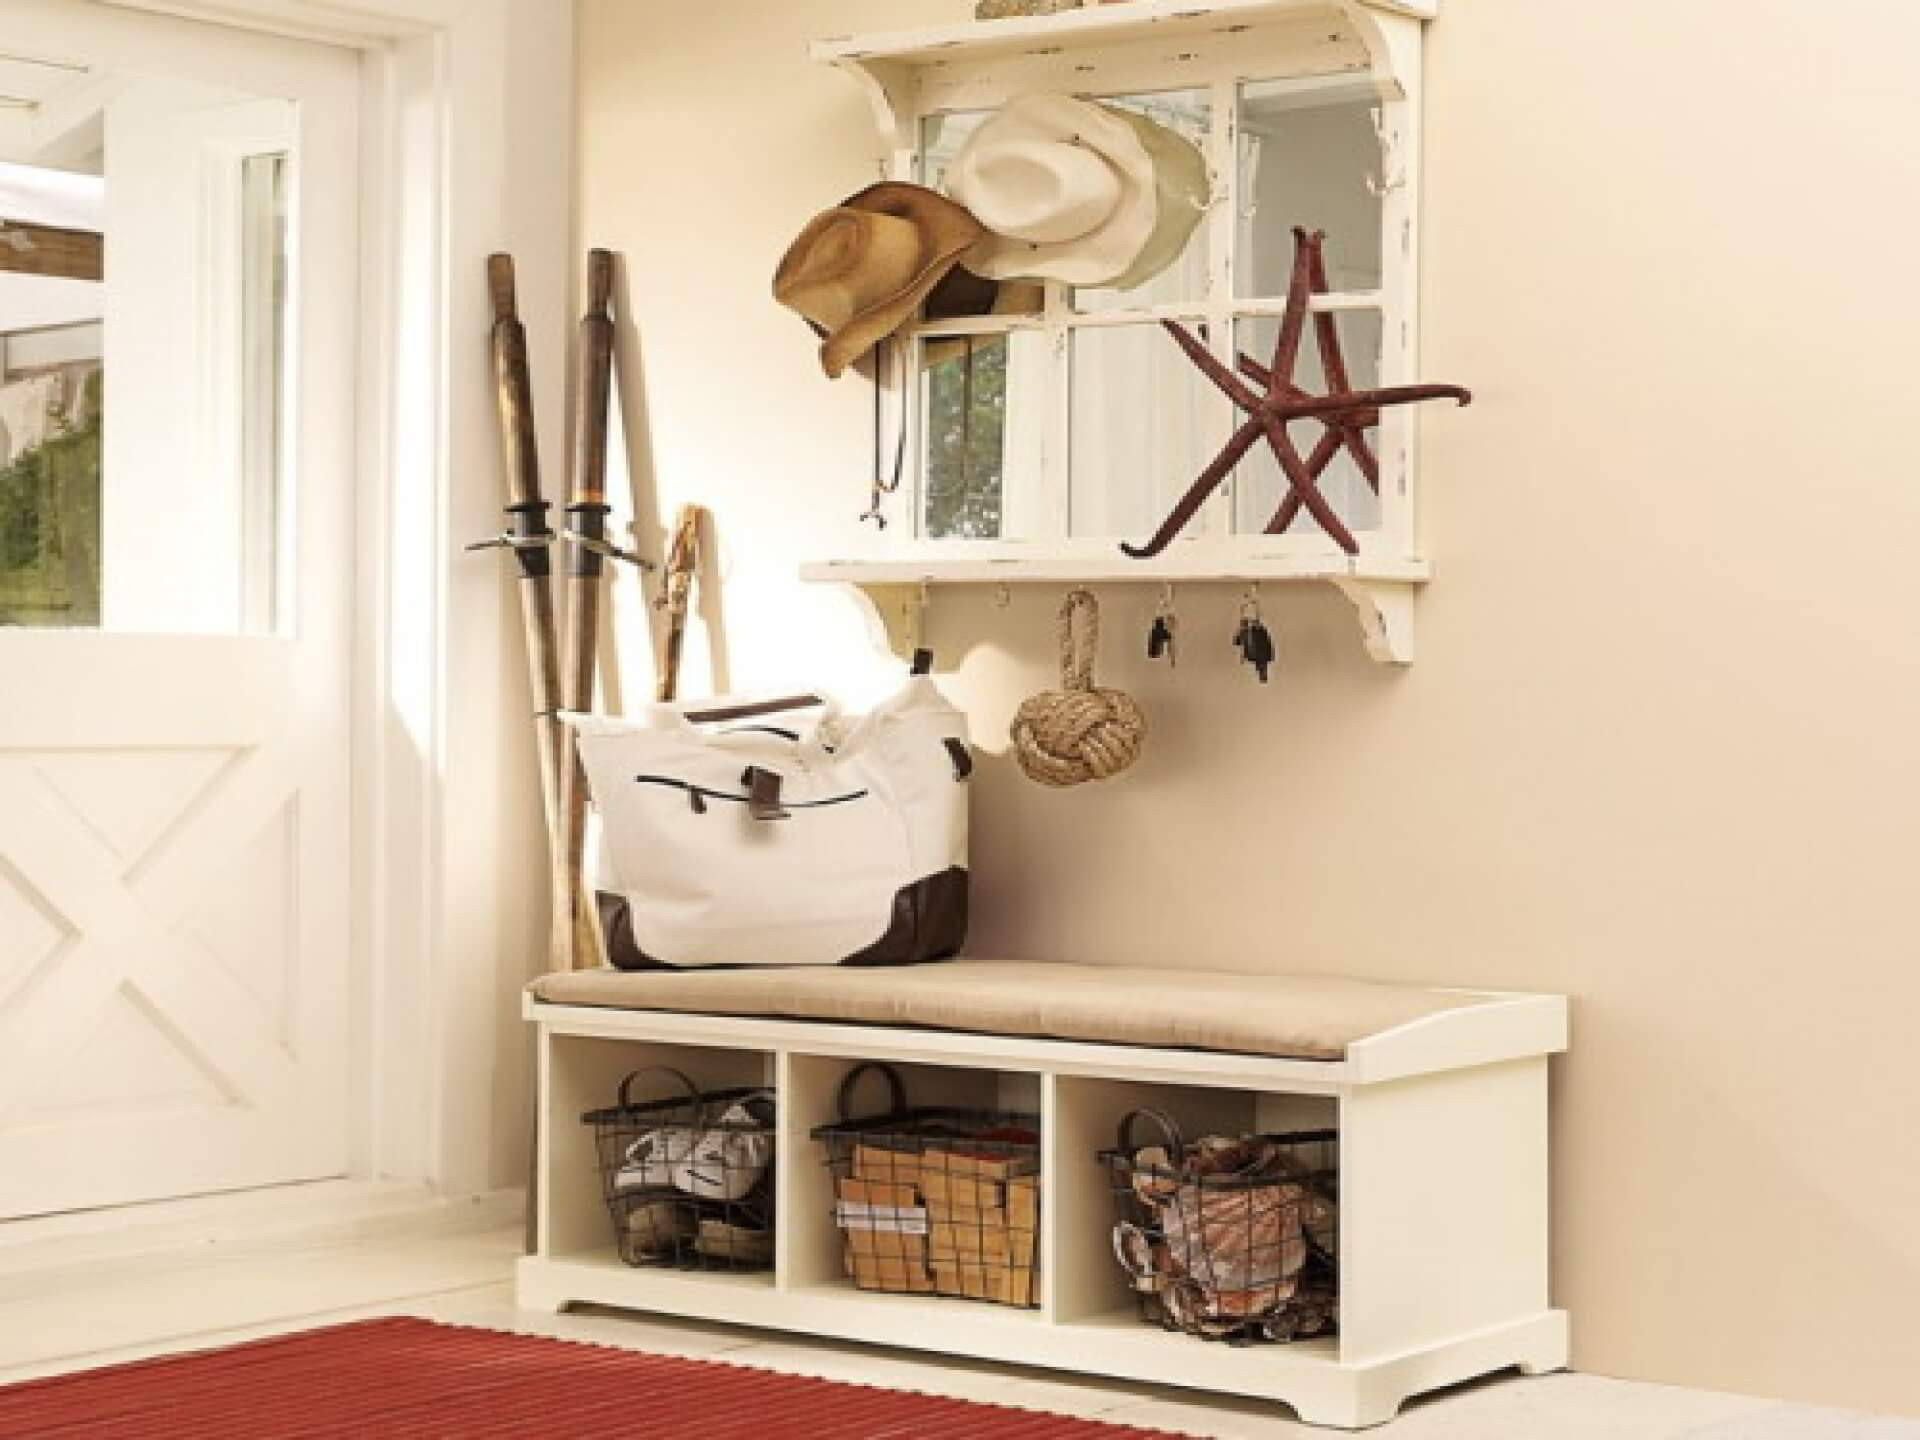 Entryway Bench With Shoe Storage
 45 Superb Mudroom & Entryway Design Ideas with Benches